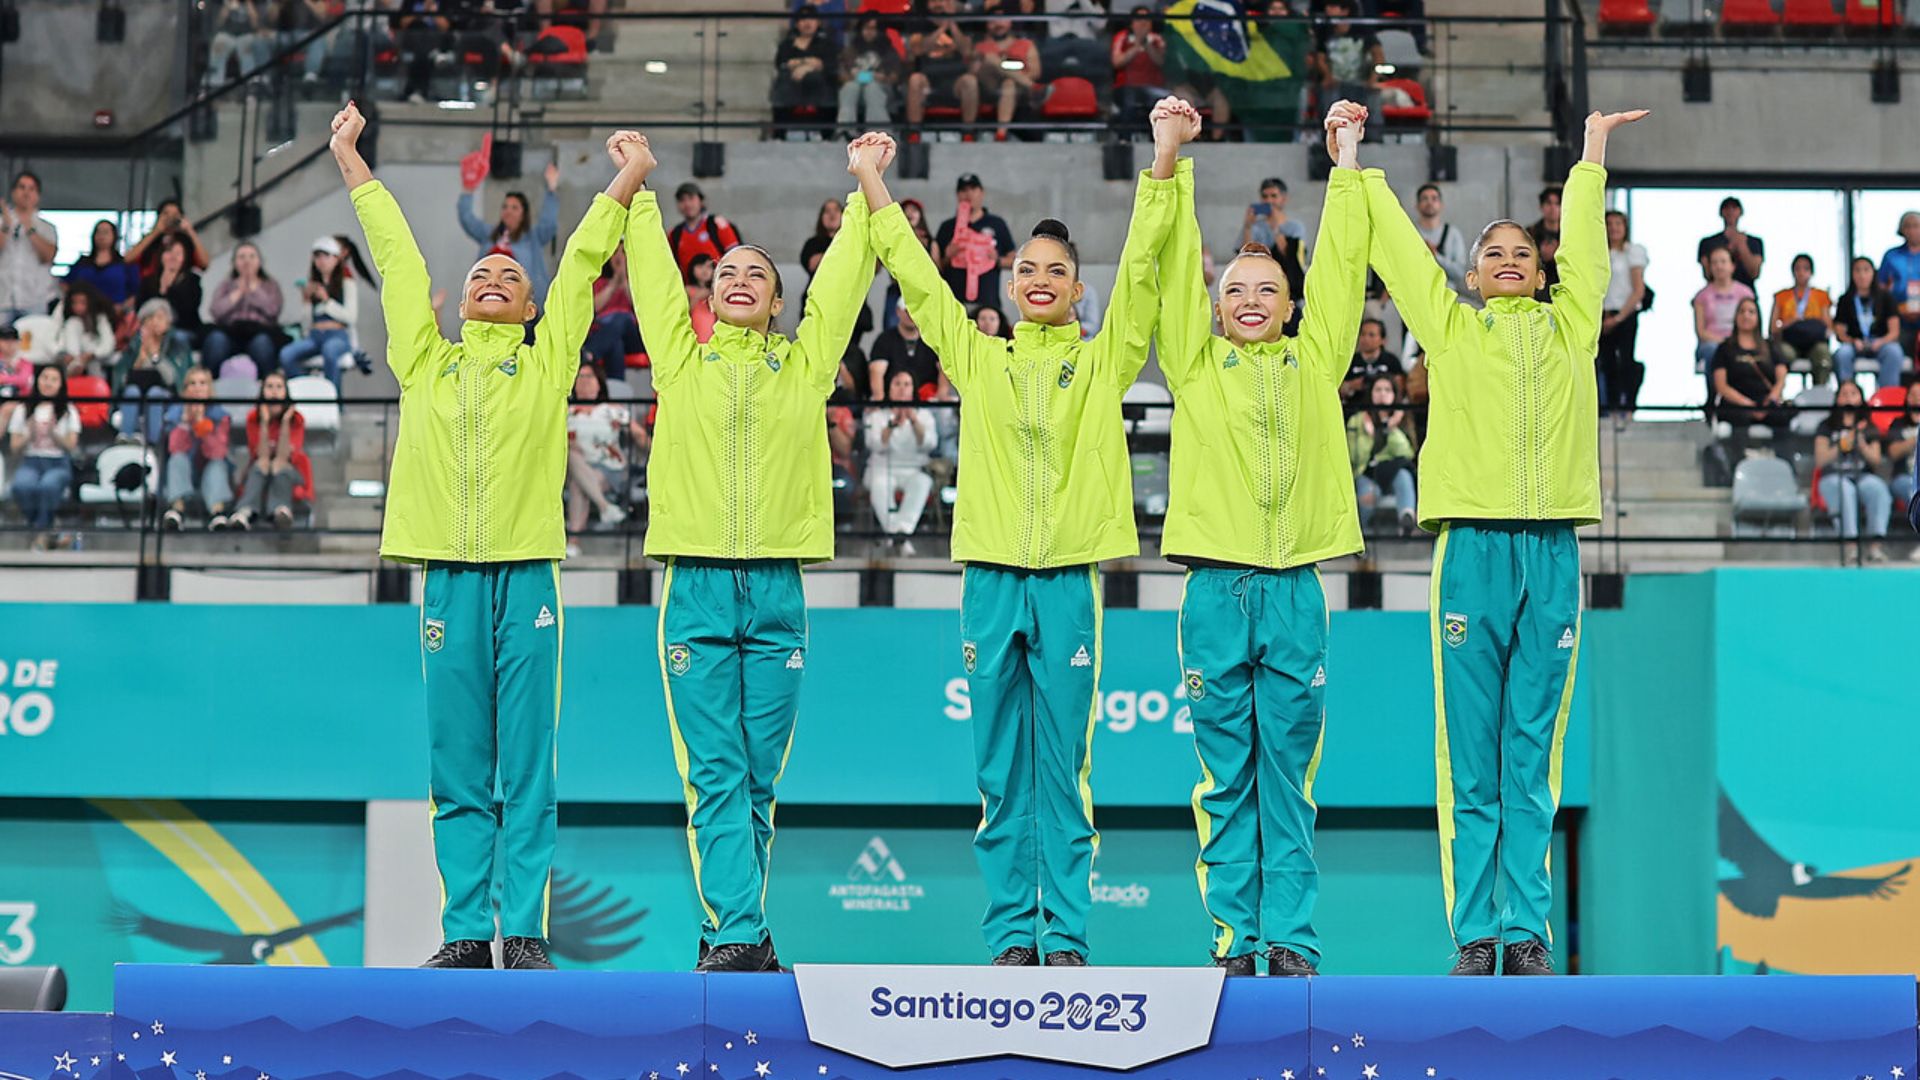 Brazil concludes rhythmic gymnastics with another gold in 3 ribbons and 2 balls